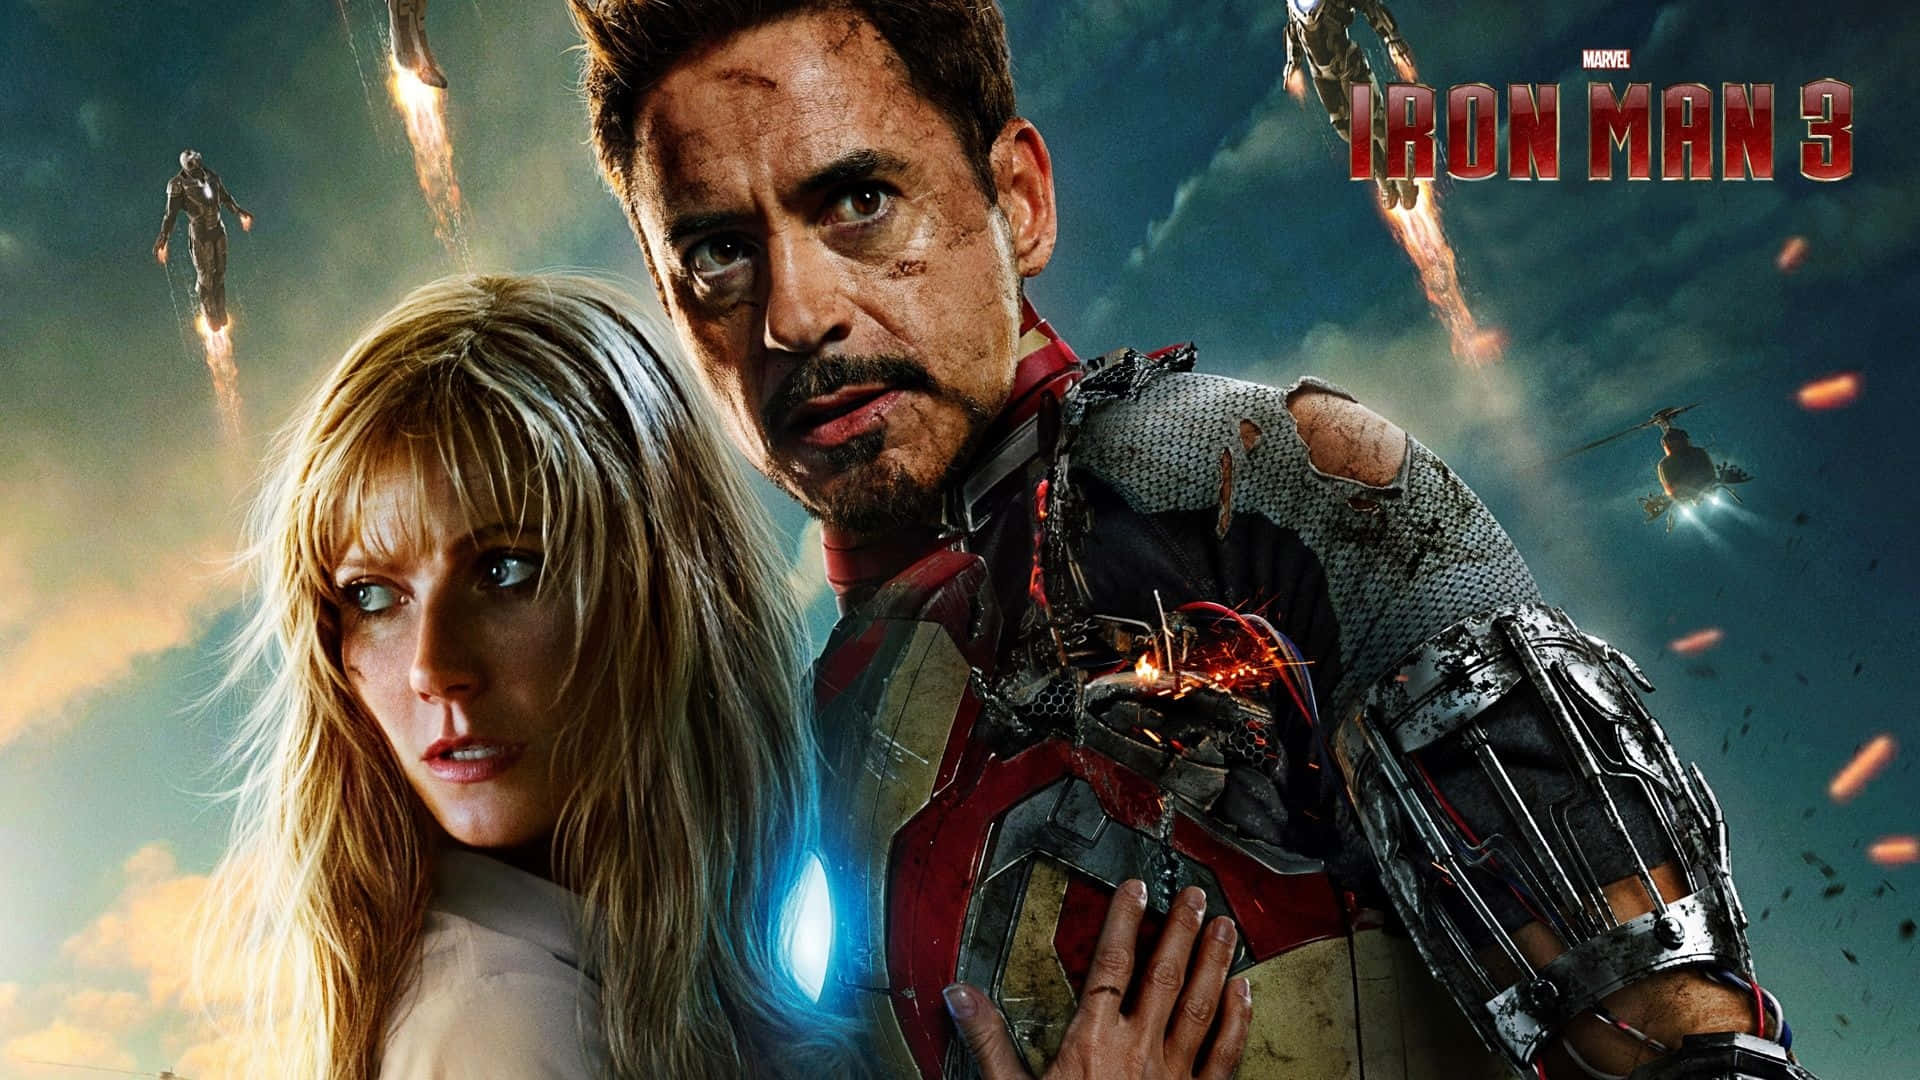 Iron Man 3 – The Powerful Conclusion To Tony Stark's Story